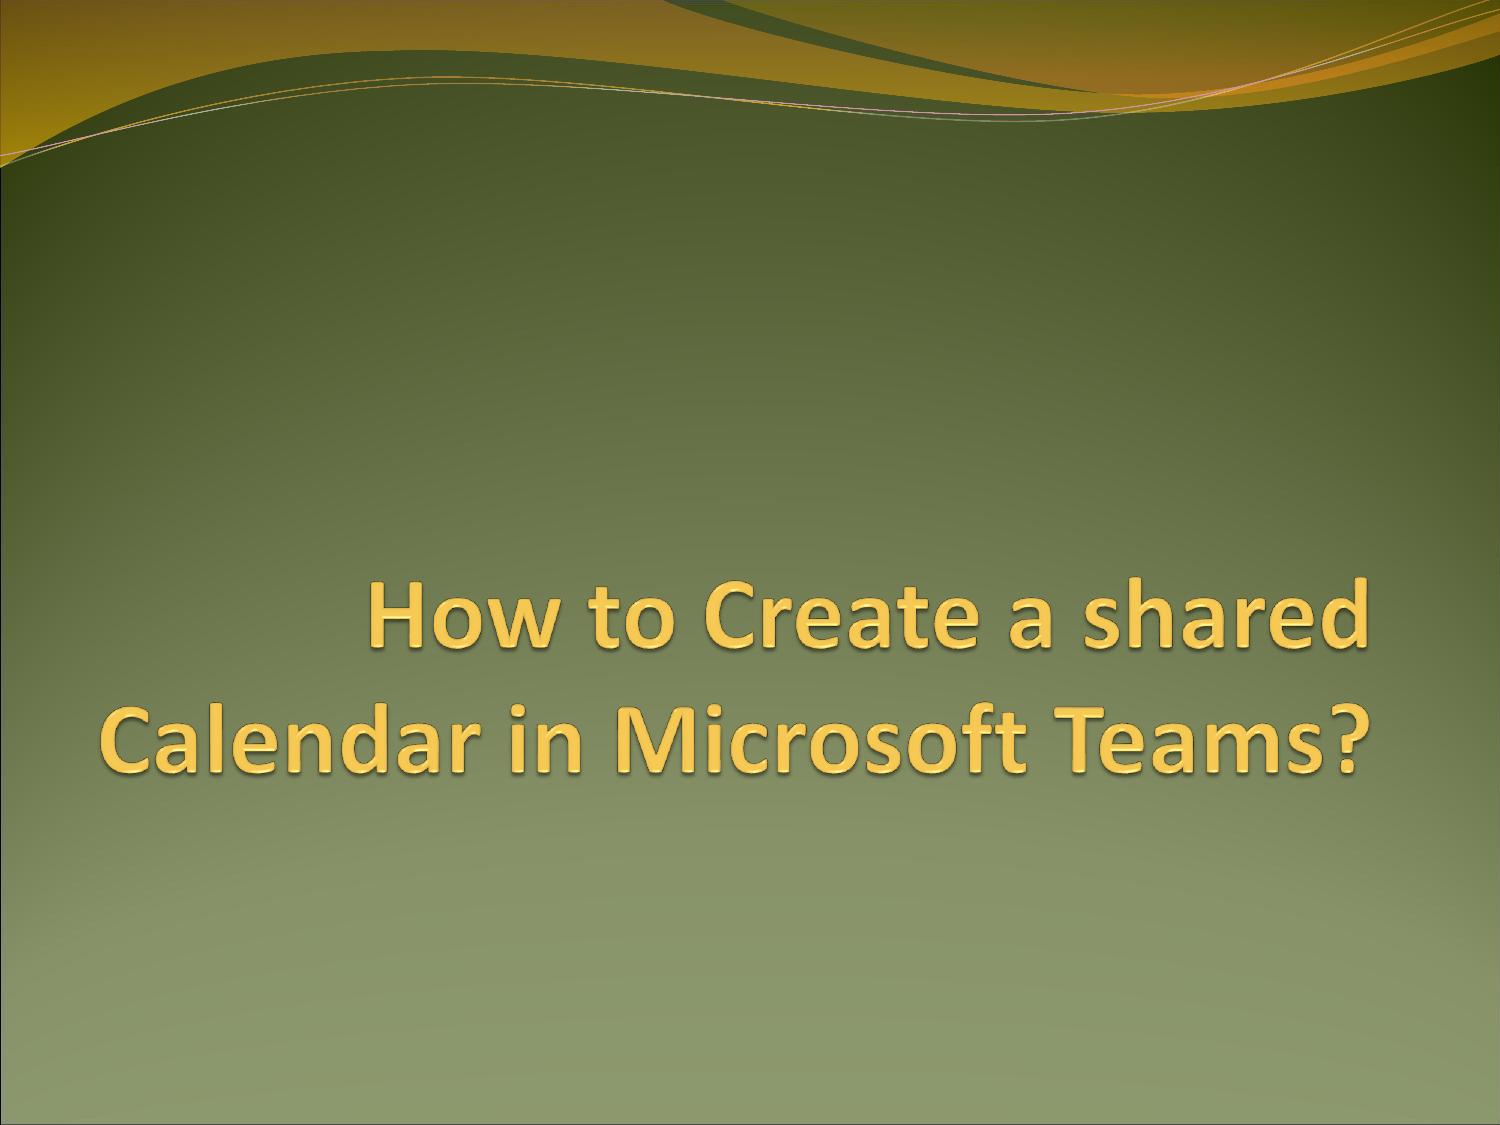 How to Create a shared Calendar in Microsoft Teams ppt DocDroid